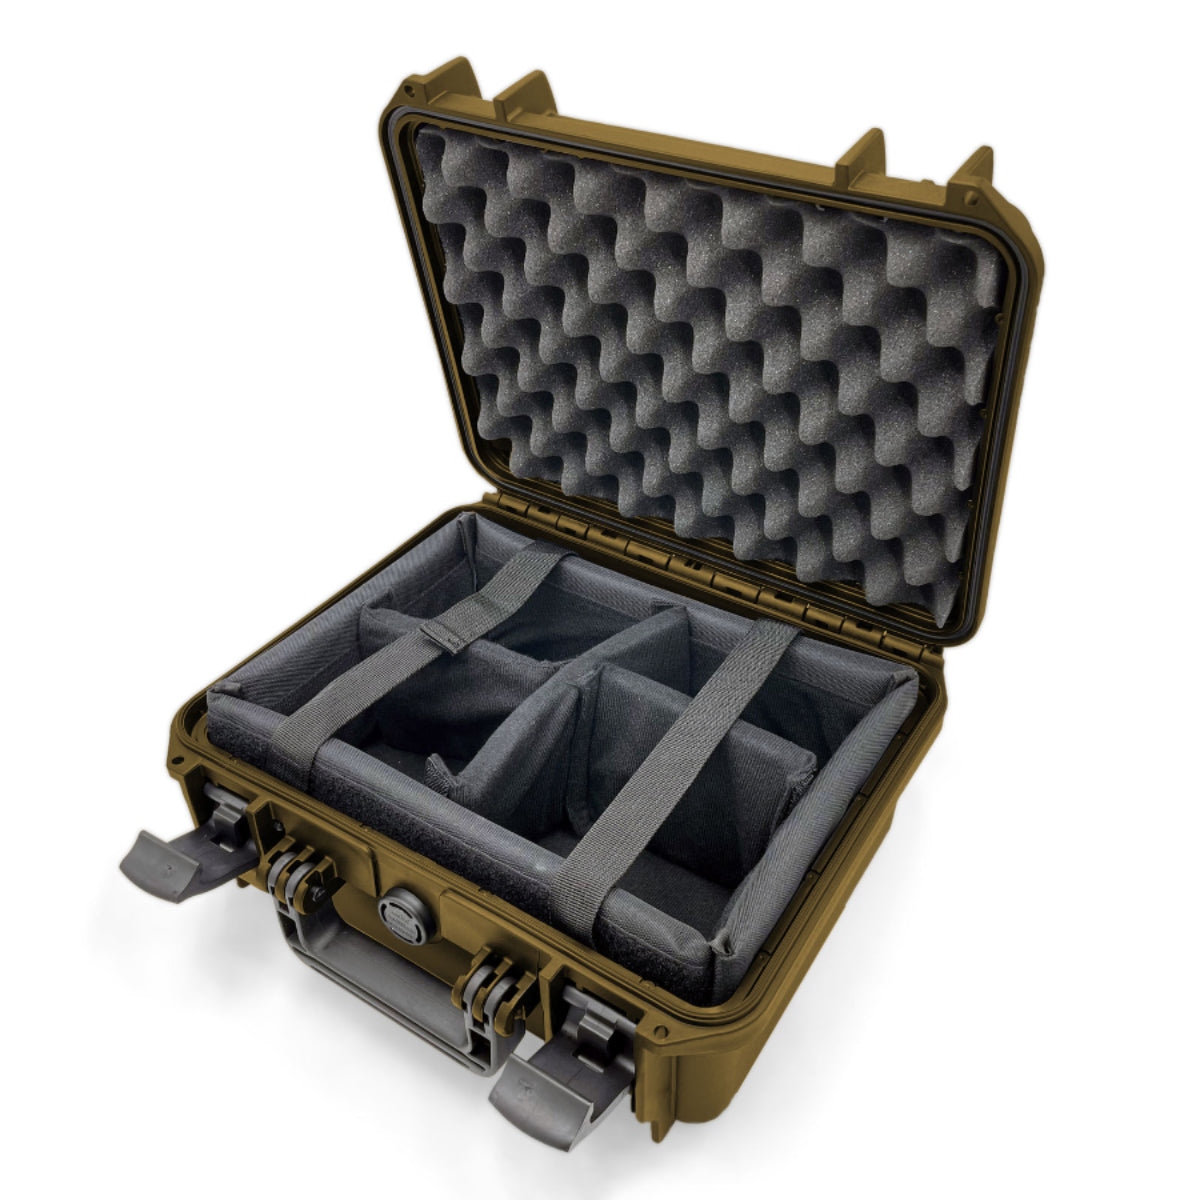 SP PRO 300CAM Sahara Carry Case, Padded Dividers, ID: L300xW225xH132mm